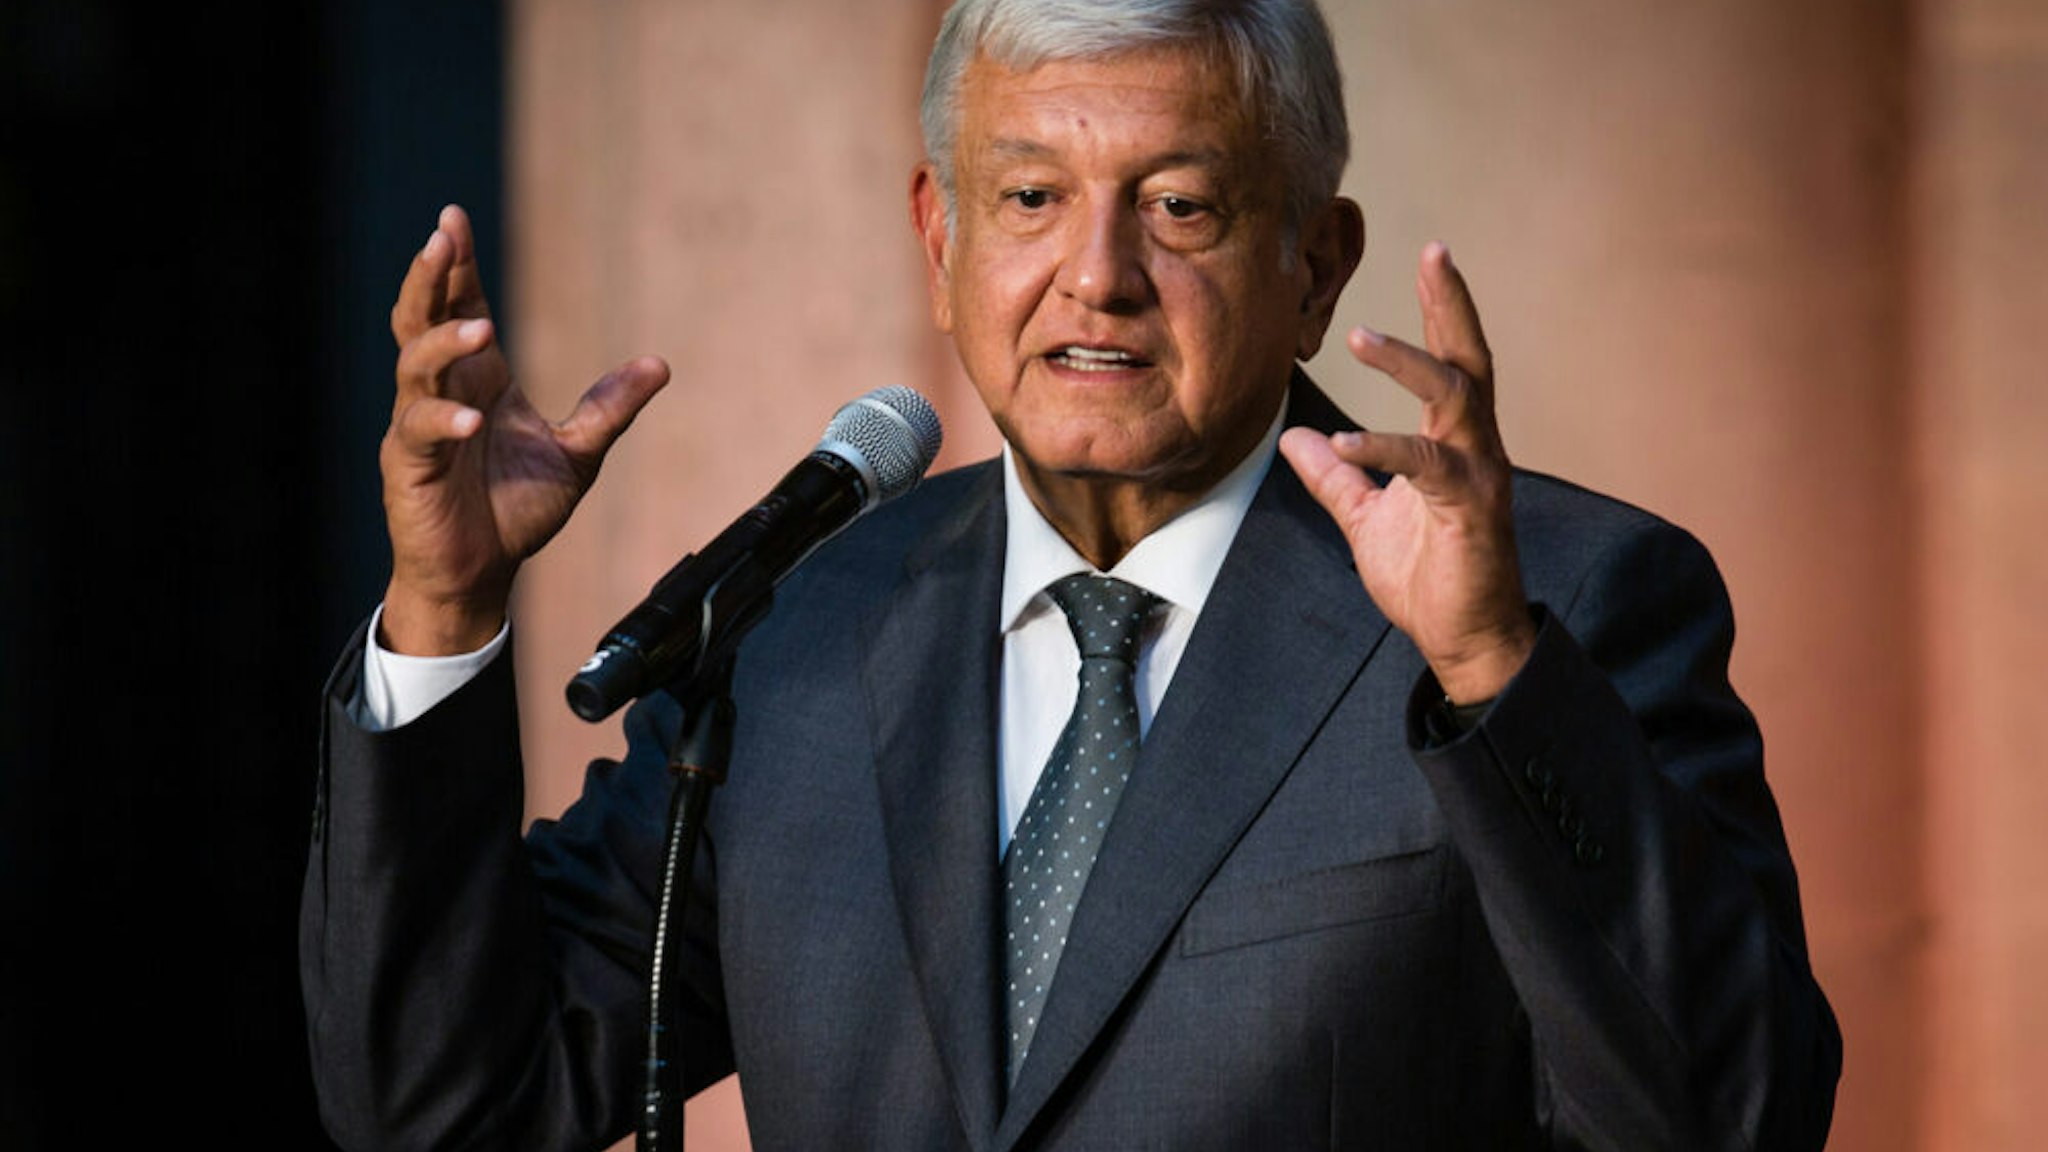 MEXICO CITY, MEXICO - JULY 03: Newly elected President of Mexico, Andres Manuel Lopez Obrador, speaks during a press conference after a private meeting with Outgoing President Enrique Peña Nieto as part of the government transition at Palacio Nacional on July 3, 2018 in Mexico City, Mexico. President elect Andres Manuel Lopez Obrador won the Mexican elections by 53% and will assume office on December 1st, 2018.